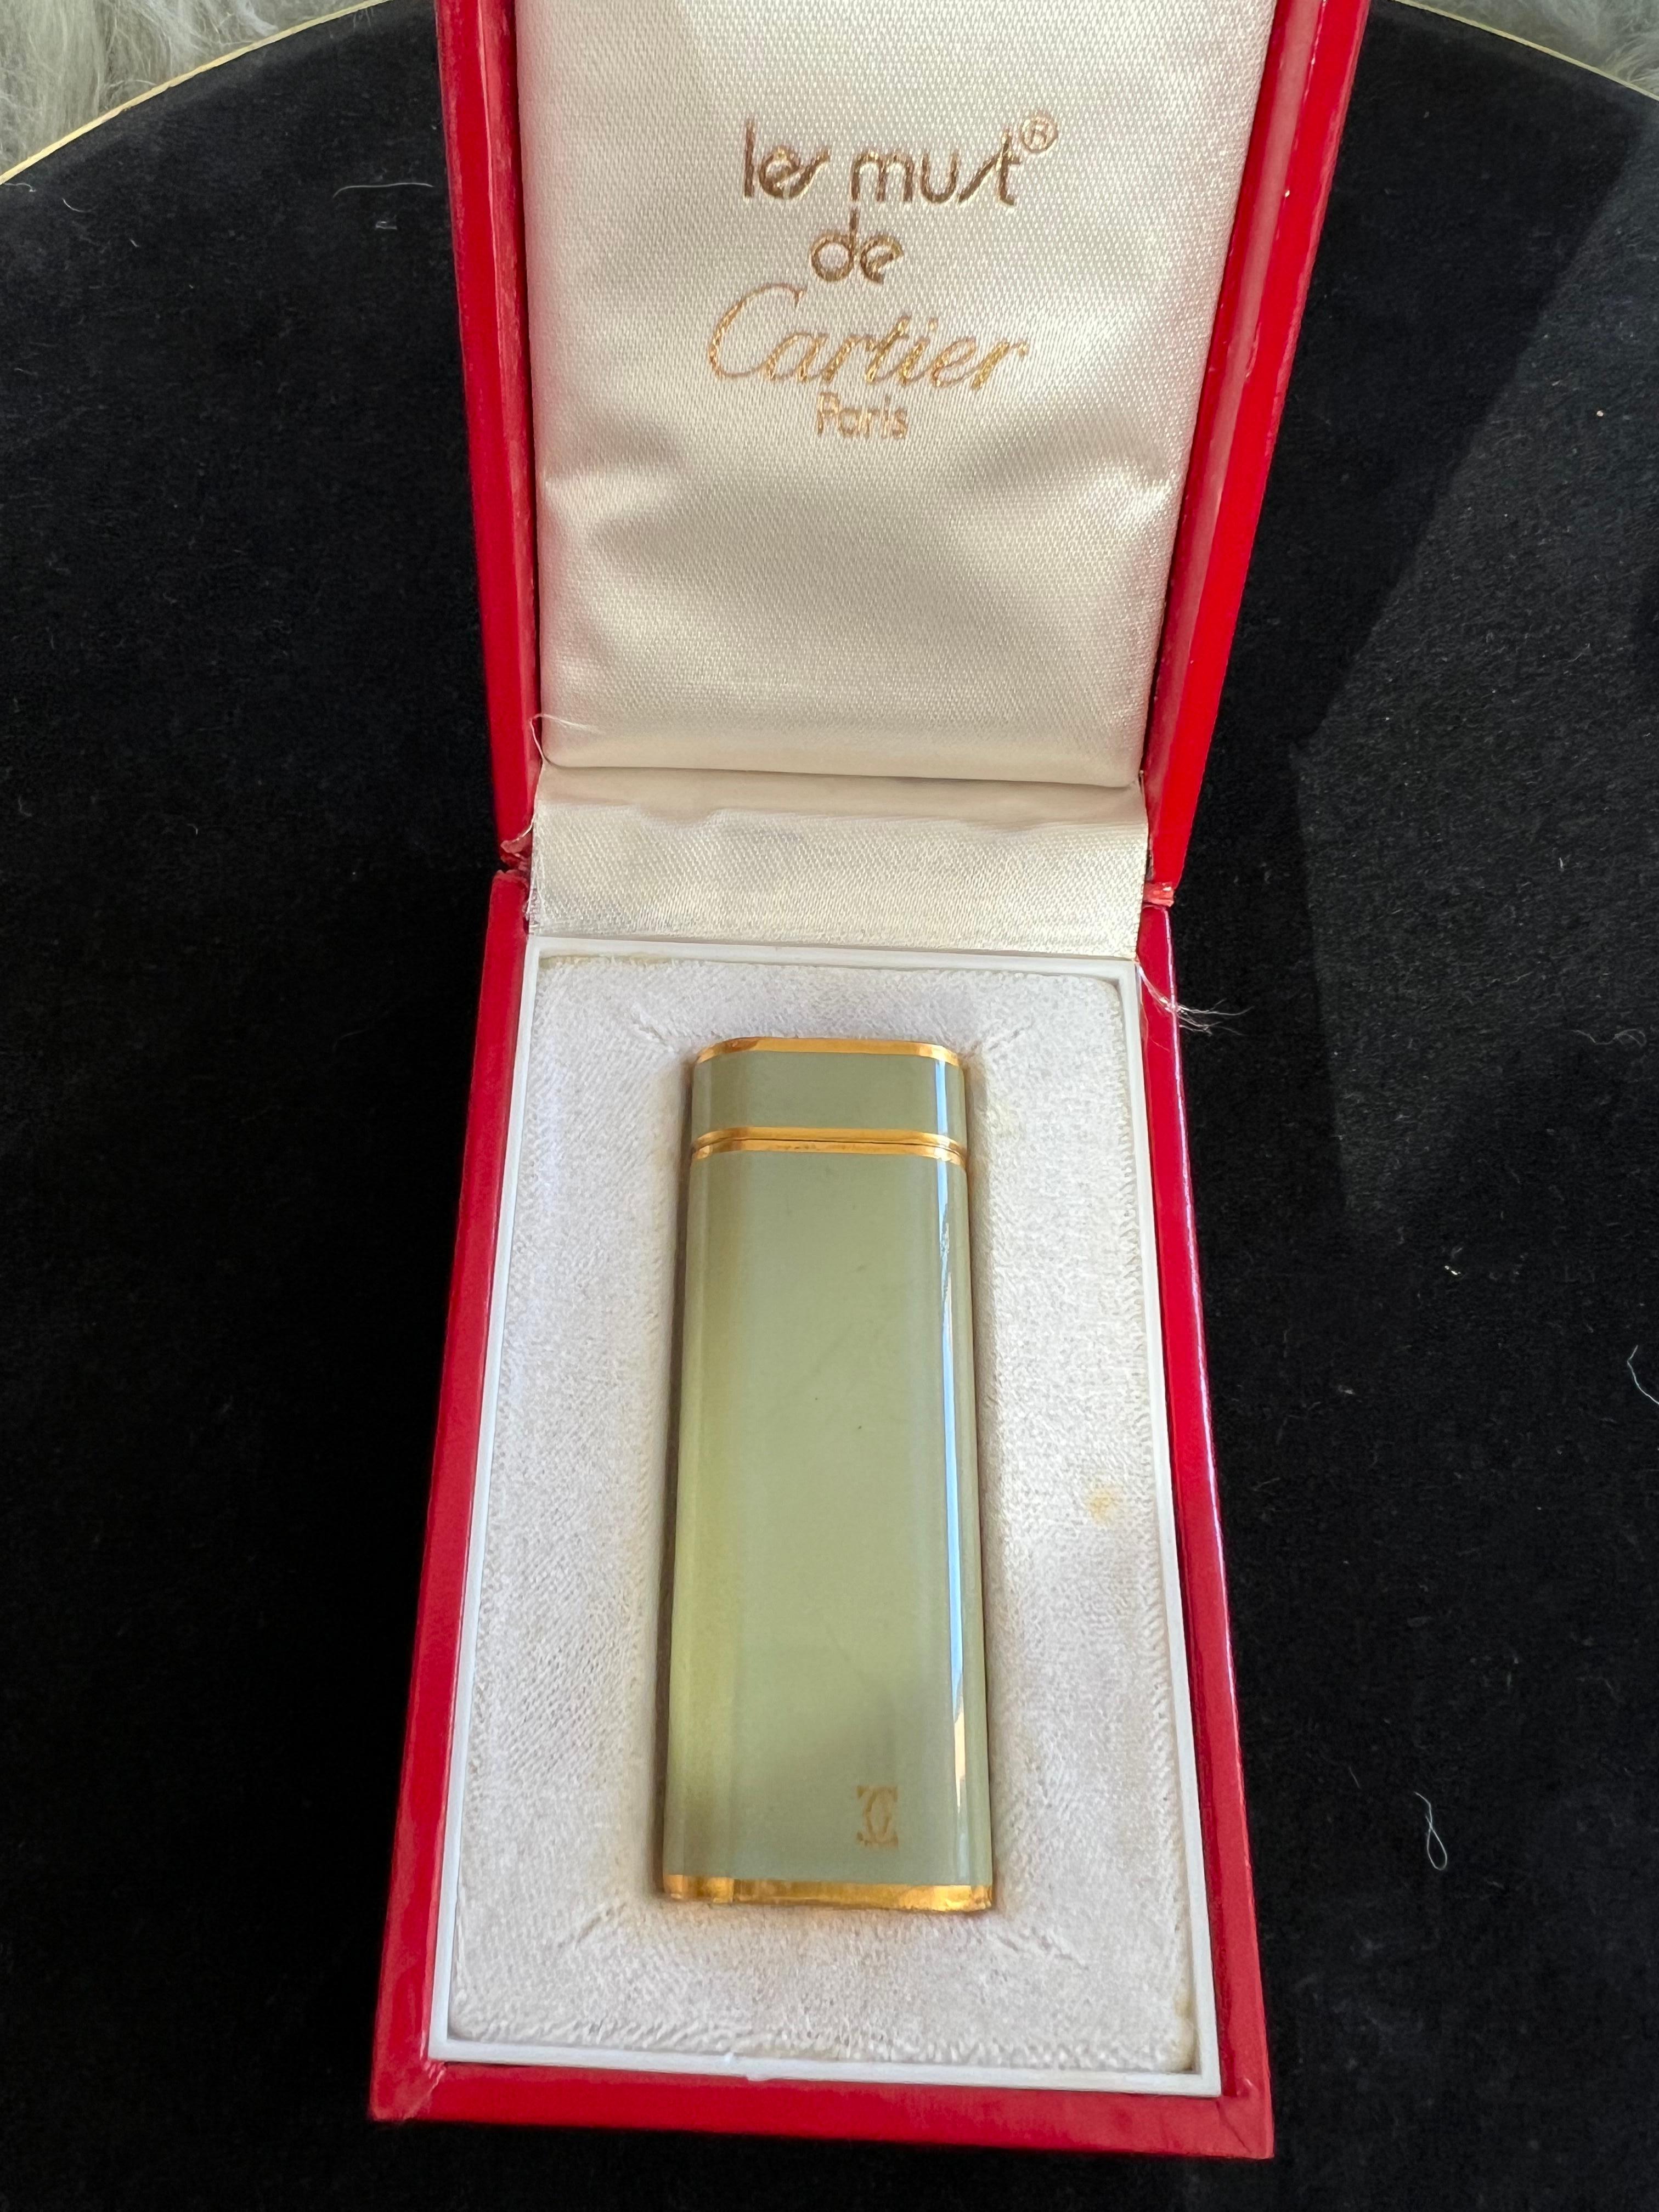 A Les Must De Cartier Paris 18k gold plated and Olive Chinese lacquer lighter 7